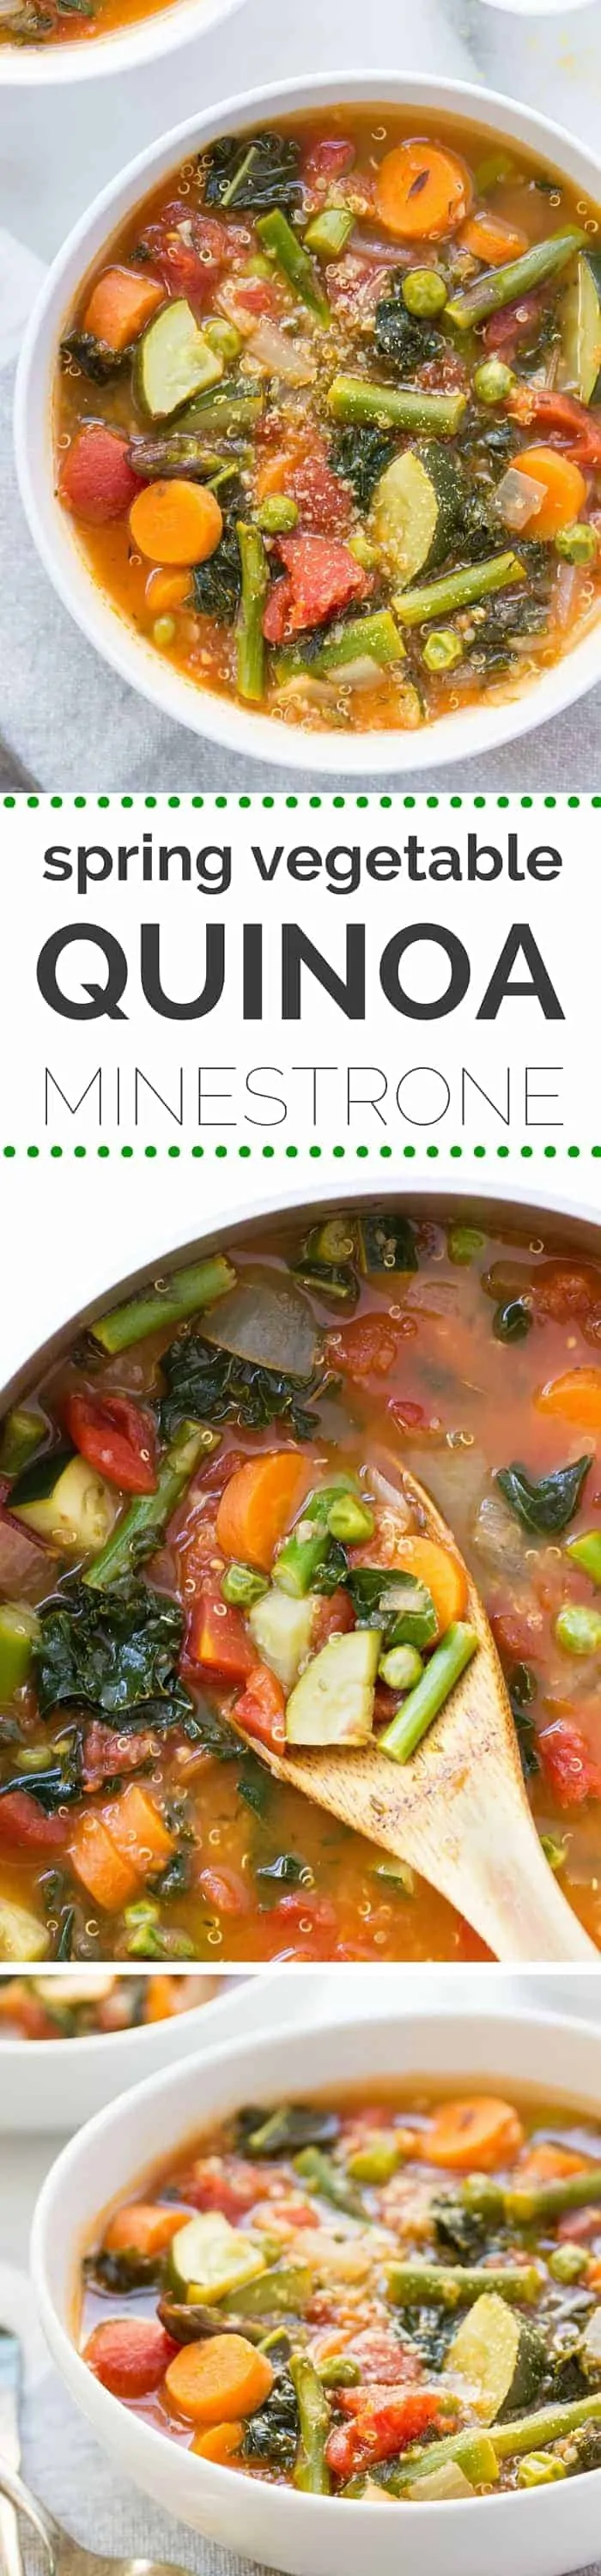 Need a quick weeknight meal? Try this QUINOA MINESTRONE! It's power packed, healthy and super easy to make! [vegan]